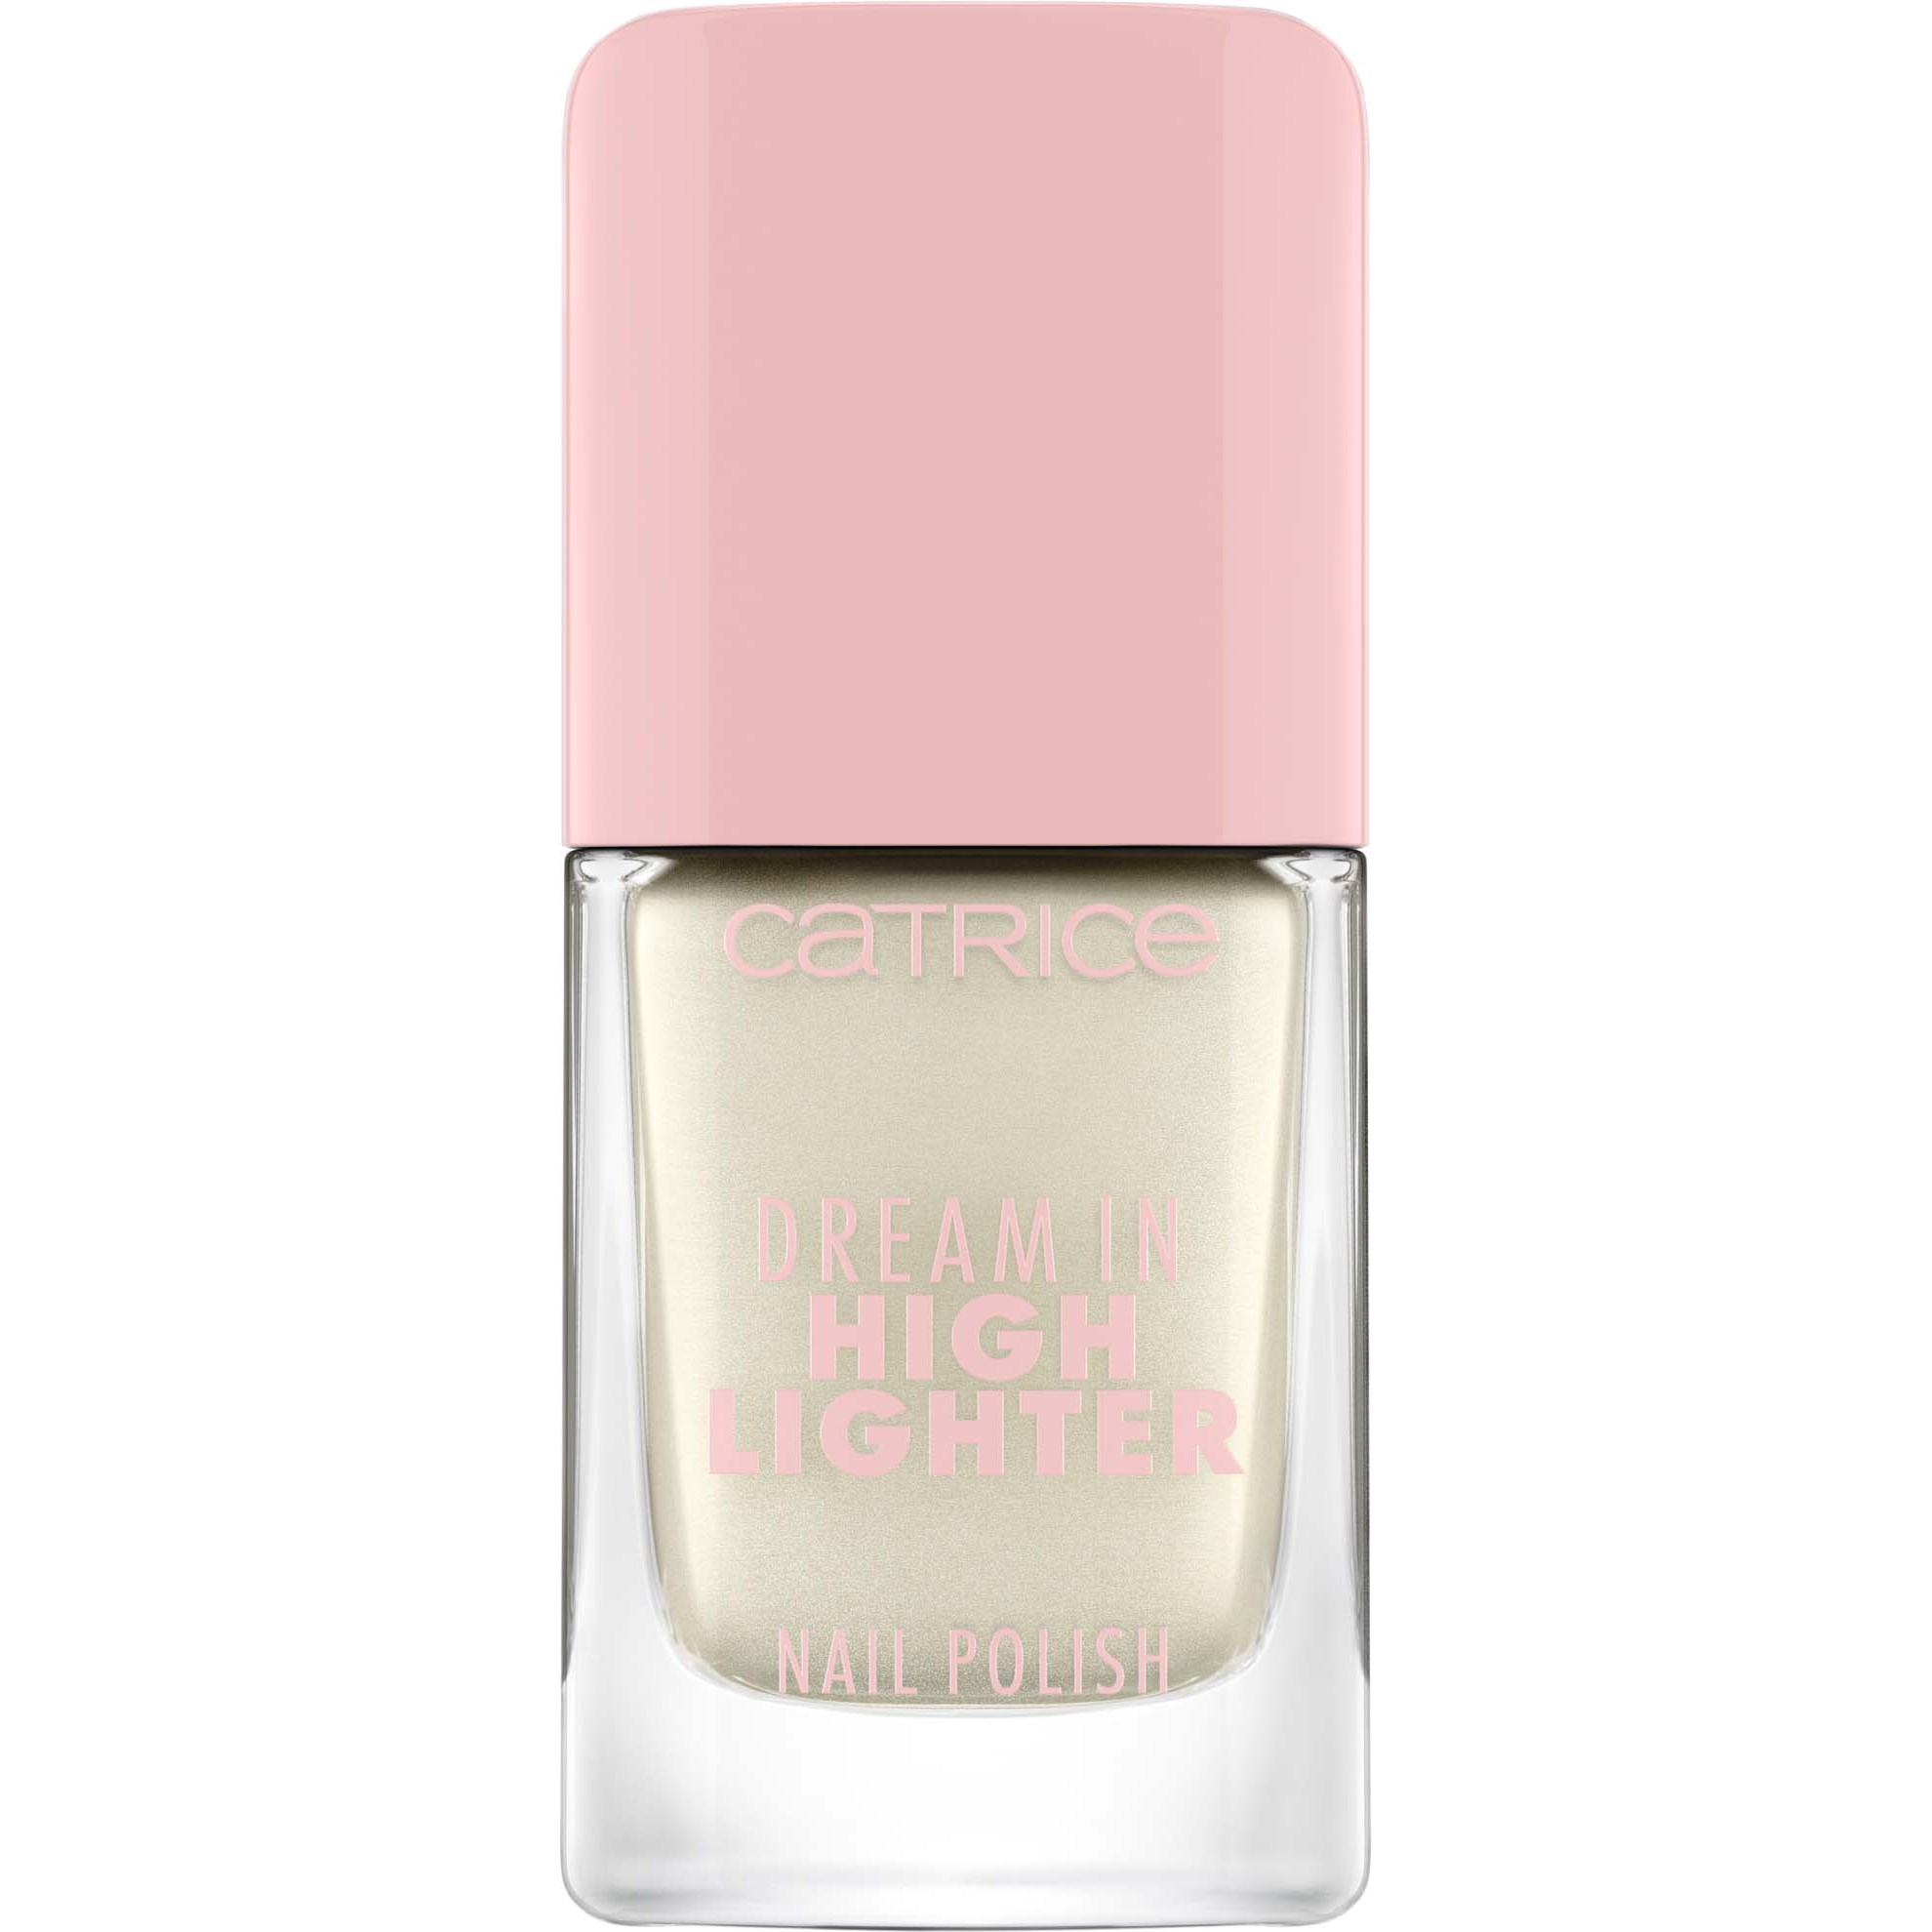 Läs mer om Catrice Dream In Highlighter Nail Polish 070 Go With The Glow